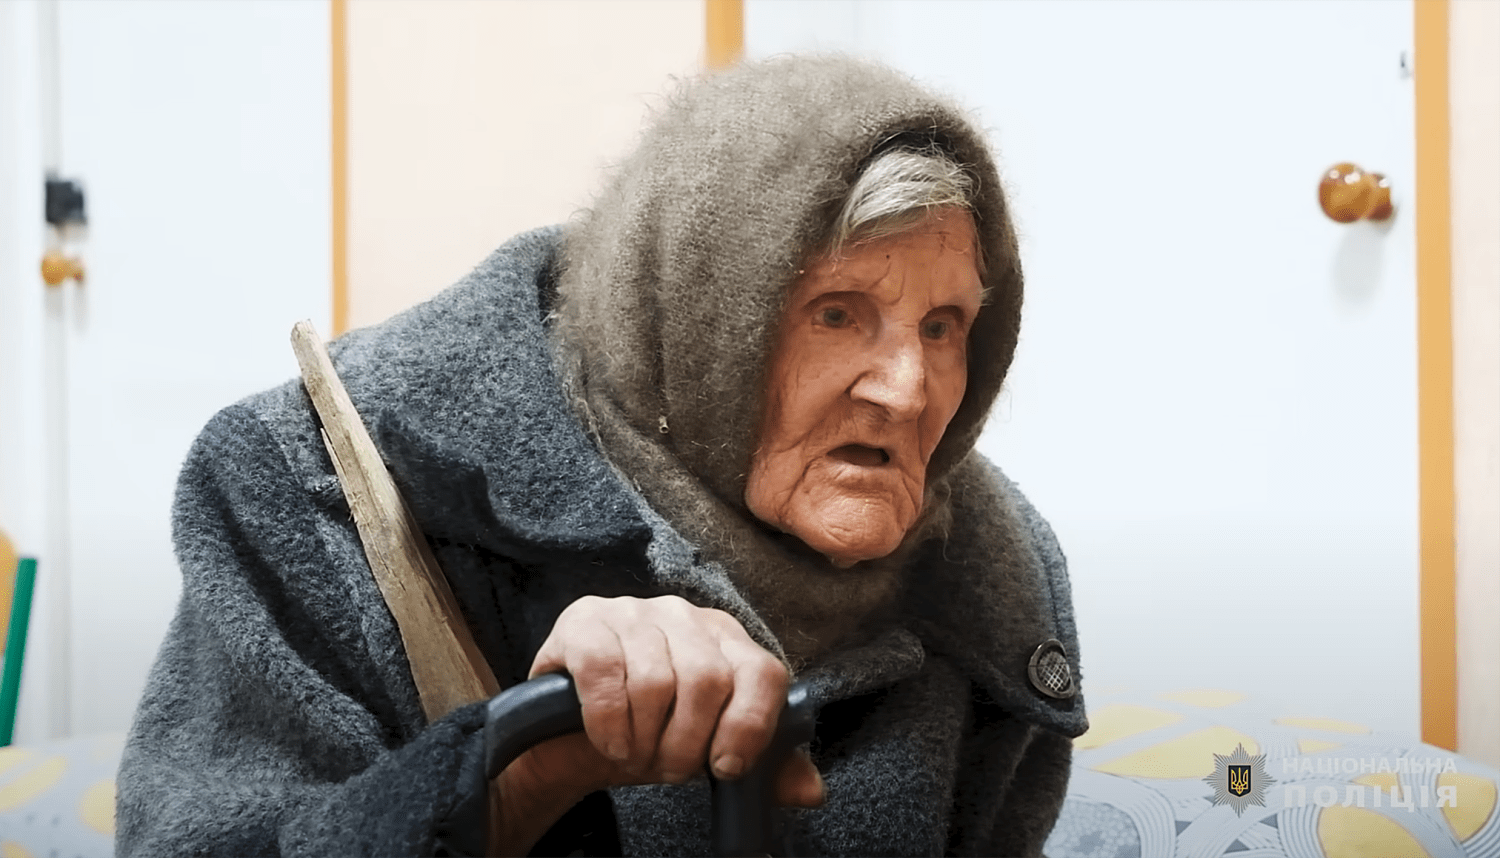 98-year-old Ukrainian woman treks miles under shelling to escape Russian forces